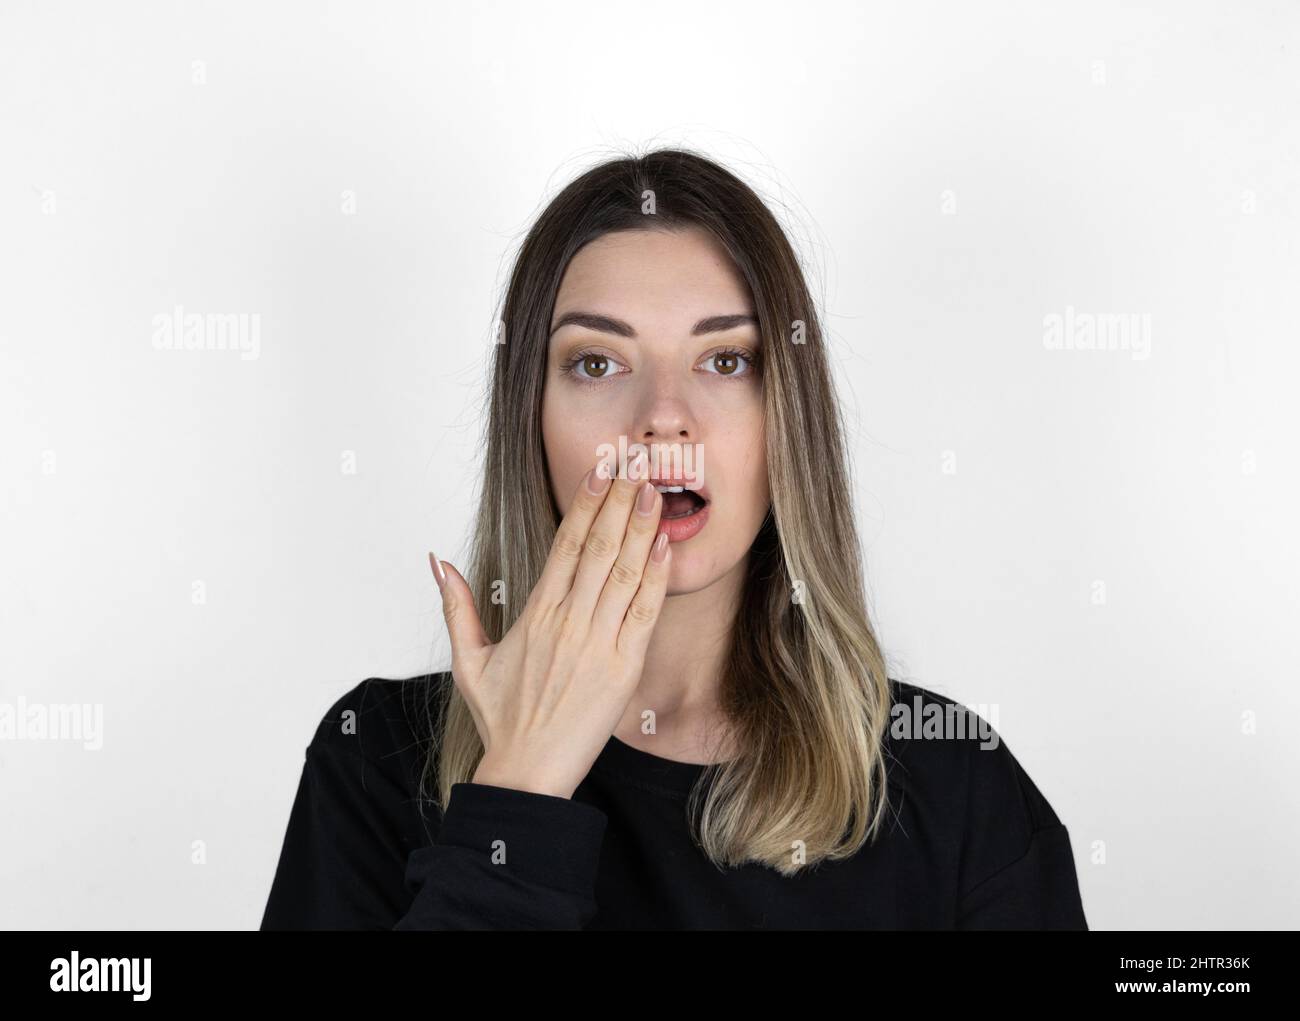 Shocked girl covering mouth with hand. 'Is that for real?!' concept photo on white background. She is looking right.  Text space. Stock Photo